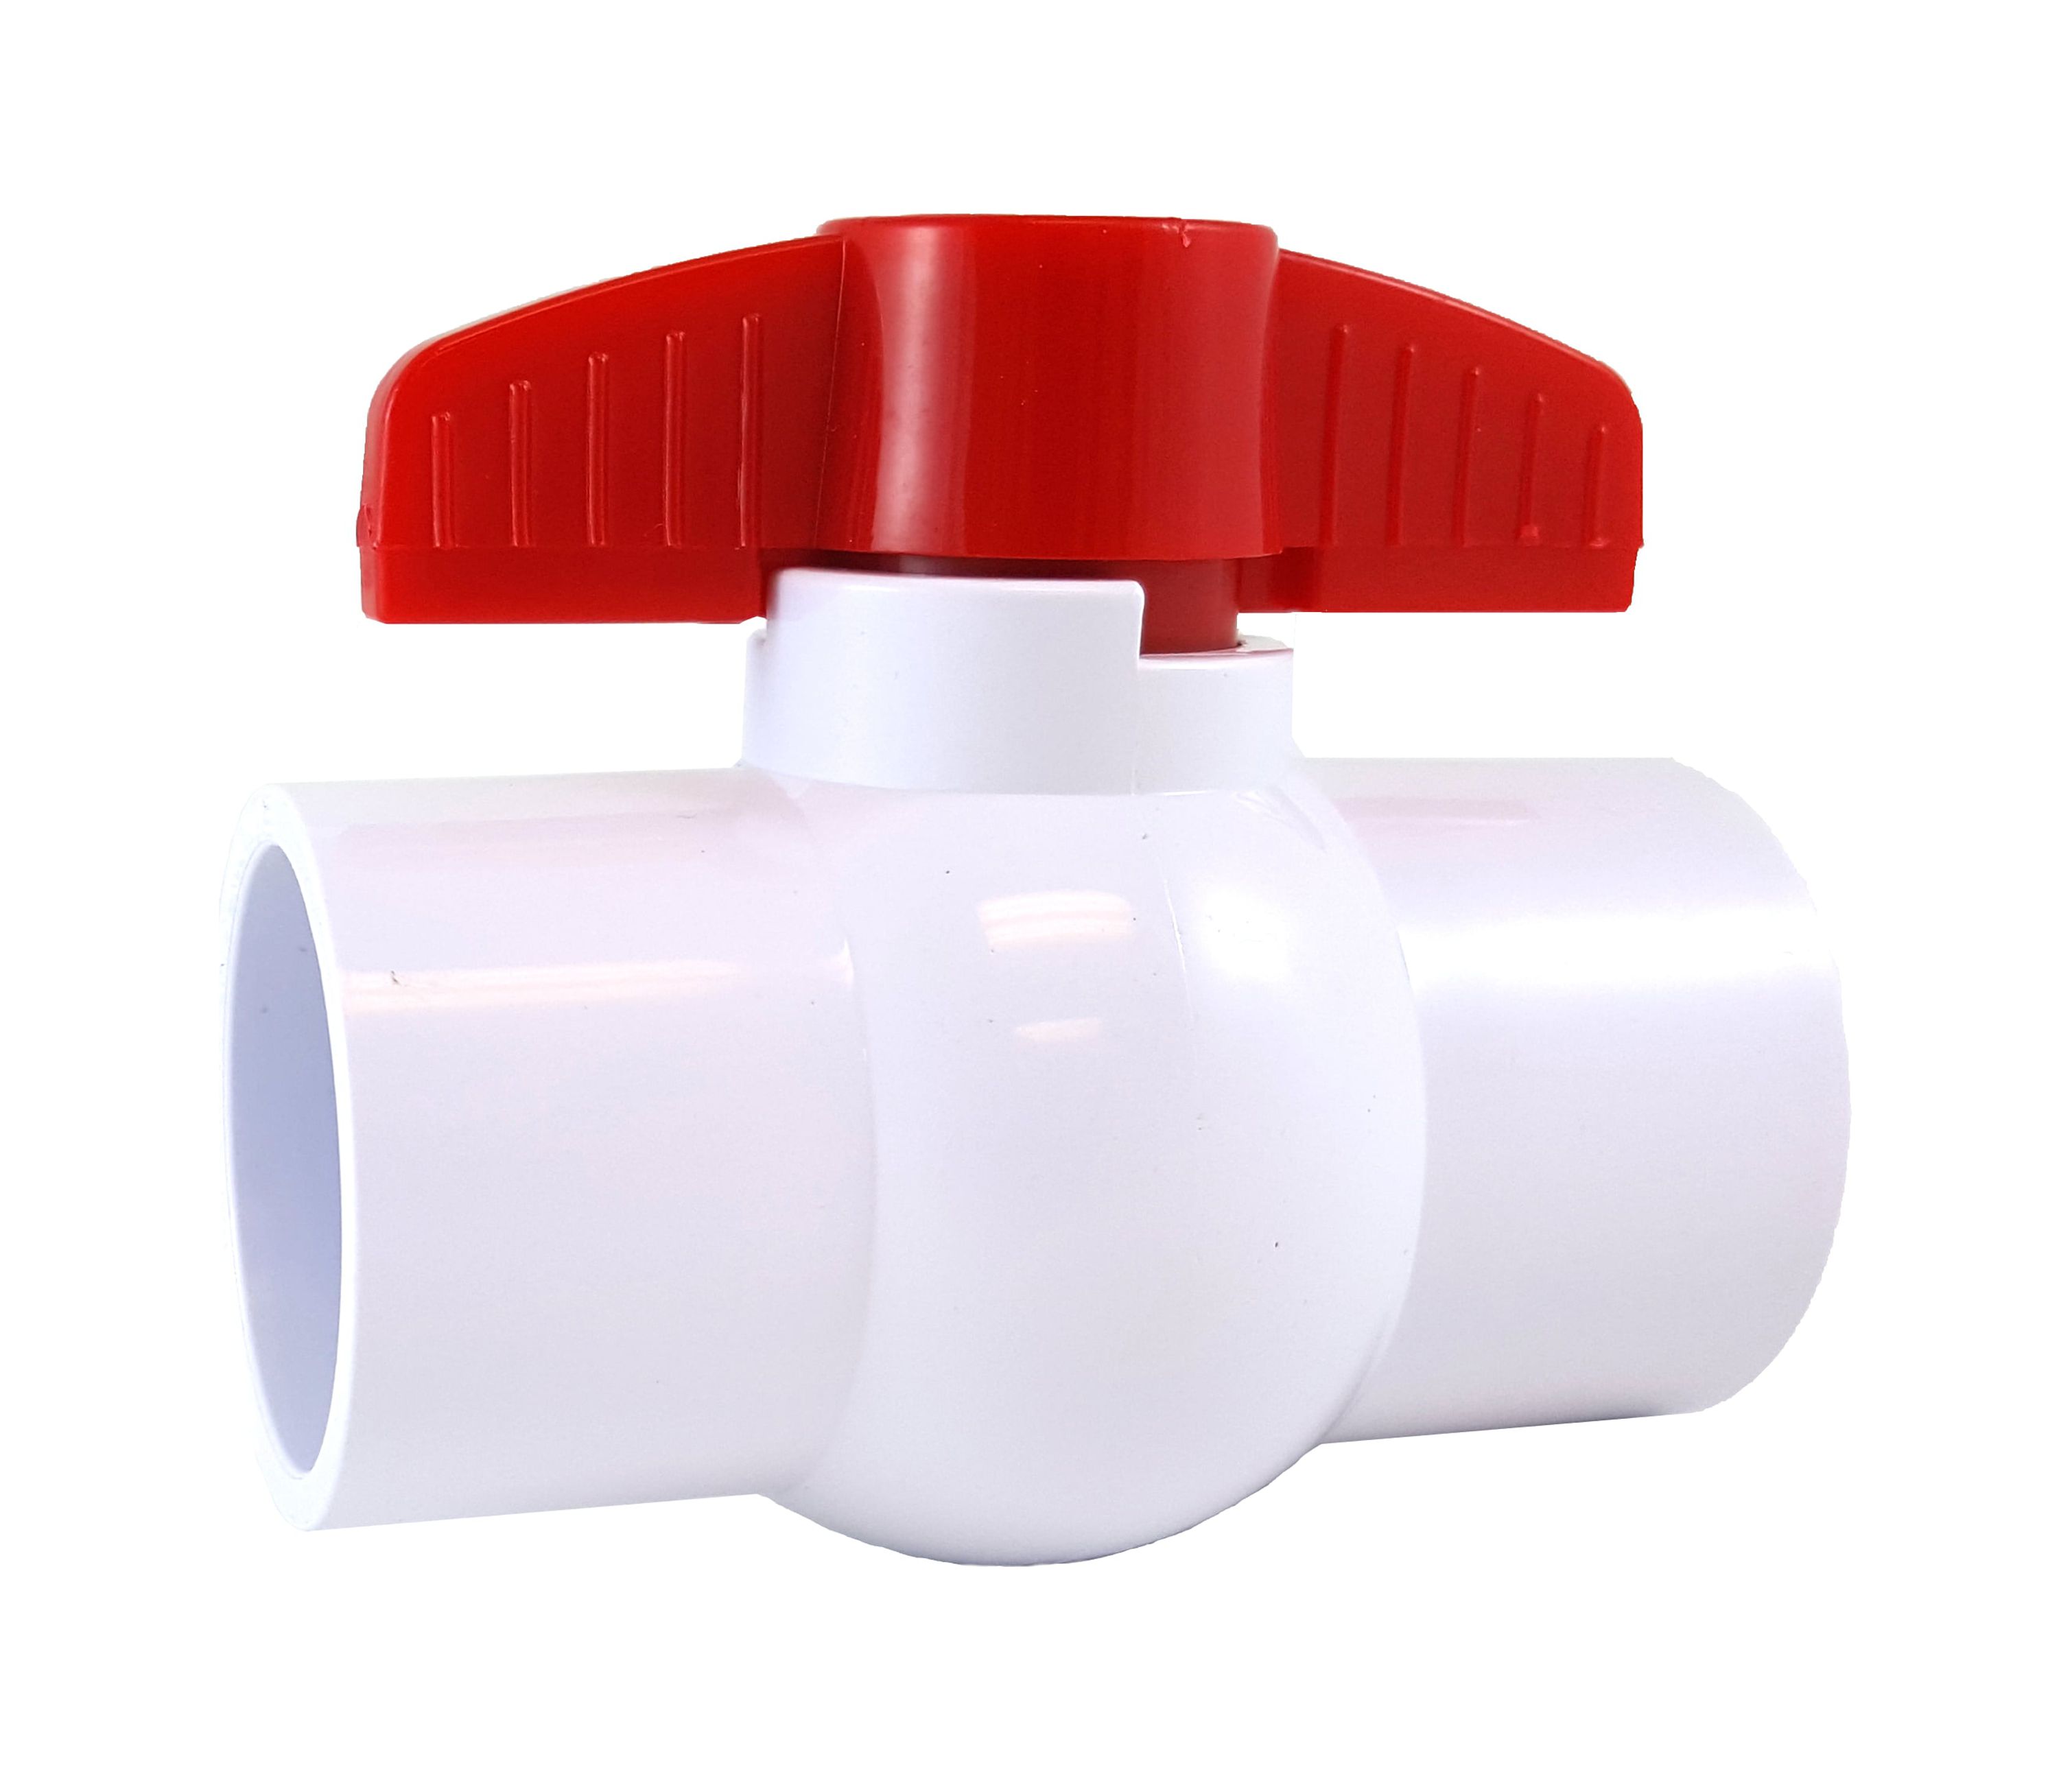 PVC COMPACT BALL VALVE 1-1/4" - Socket - Sanipro - (Pack of 6) - image 1 of 3